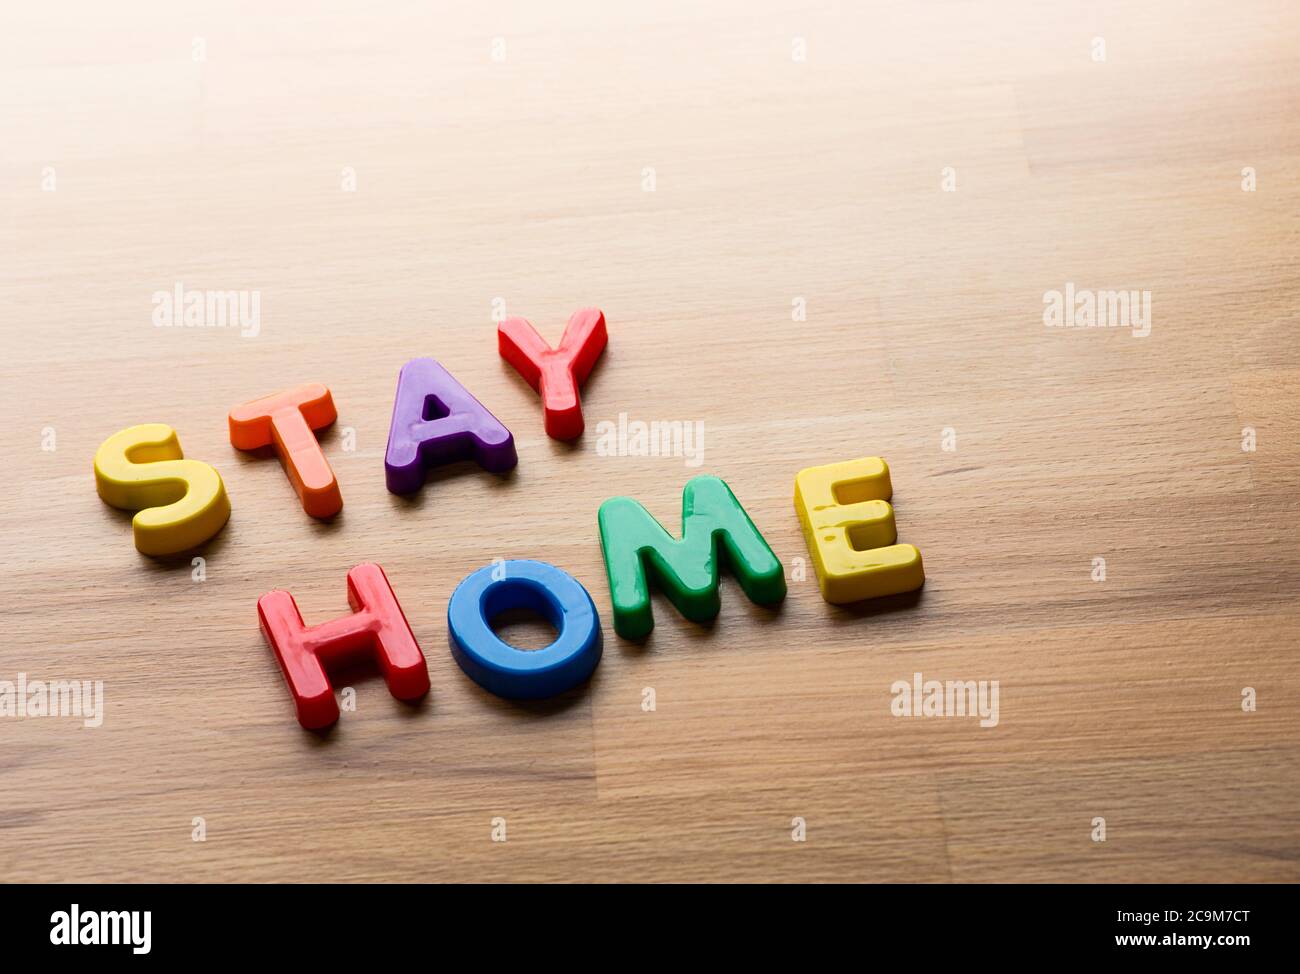 Stay home concepts with colorful text message on wood table.New normal lifestyle and routine Stock Photo